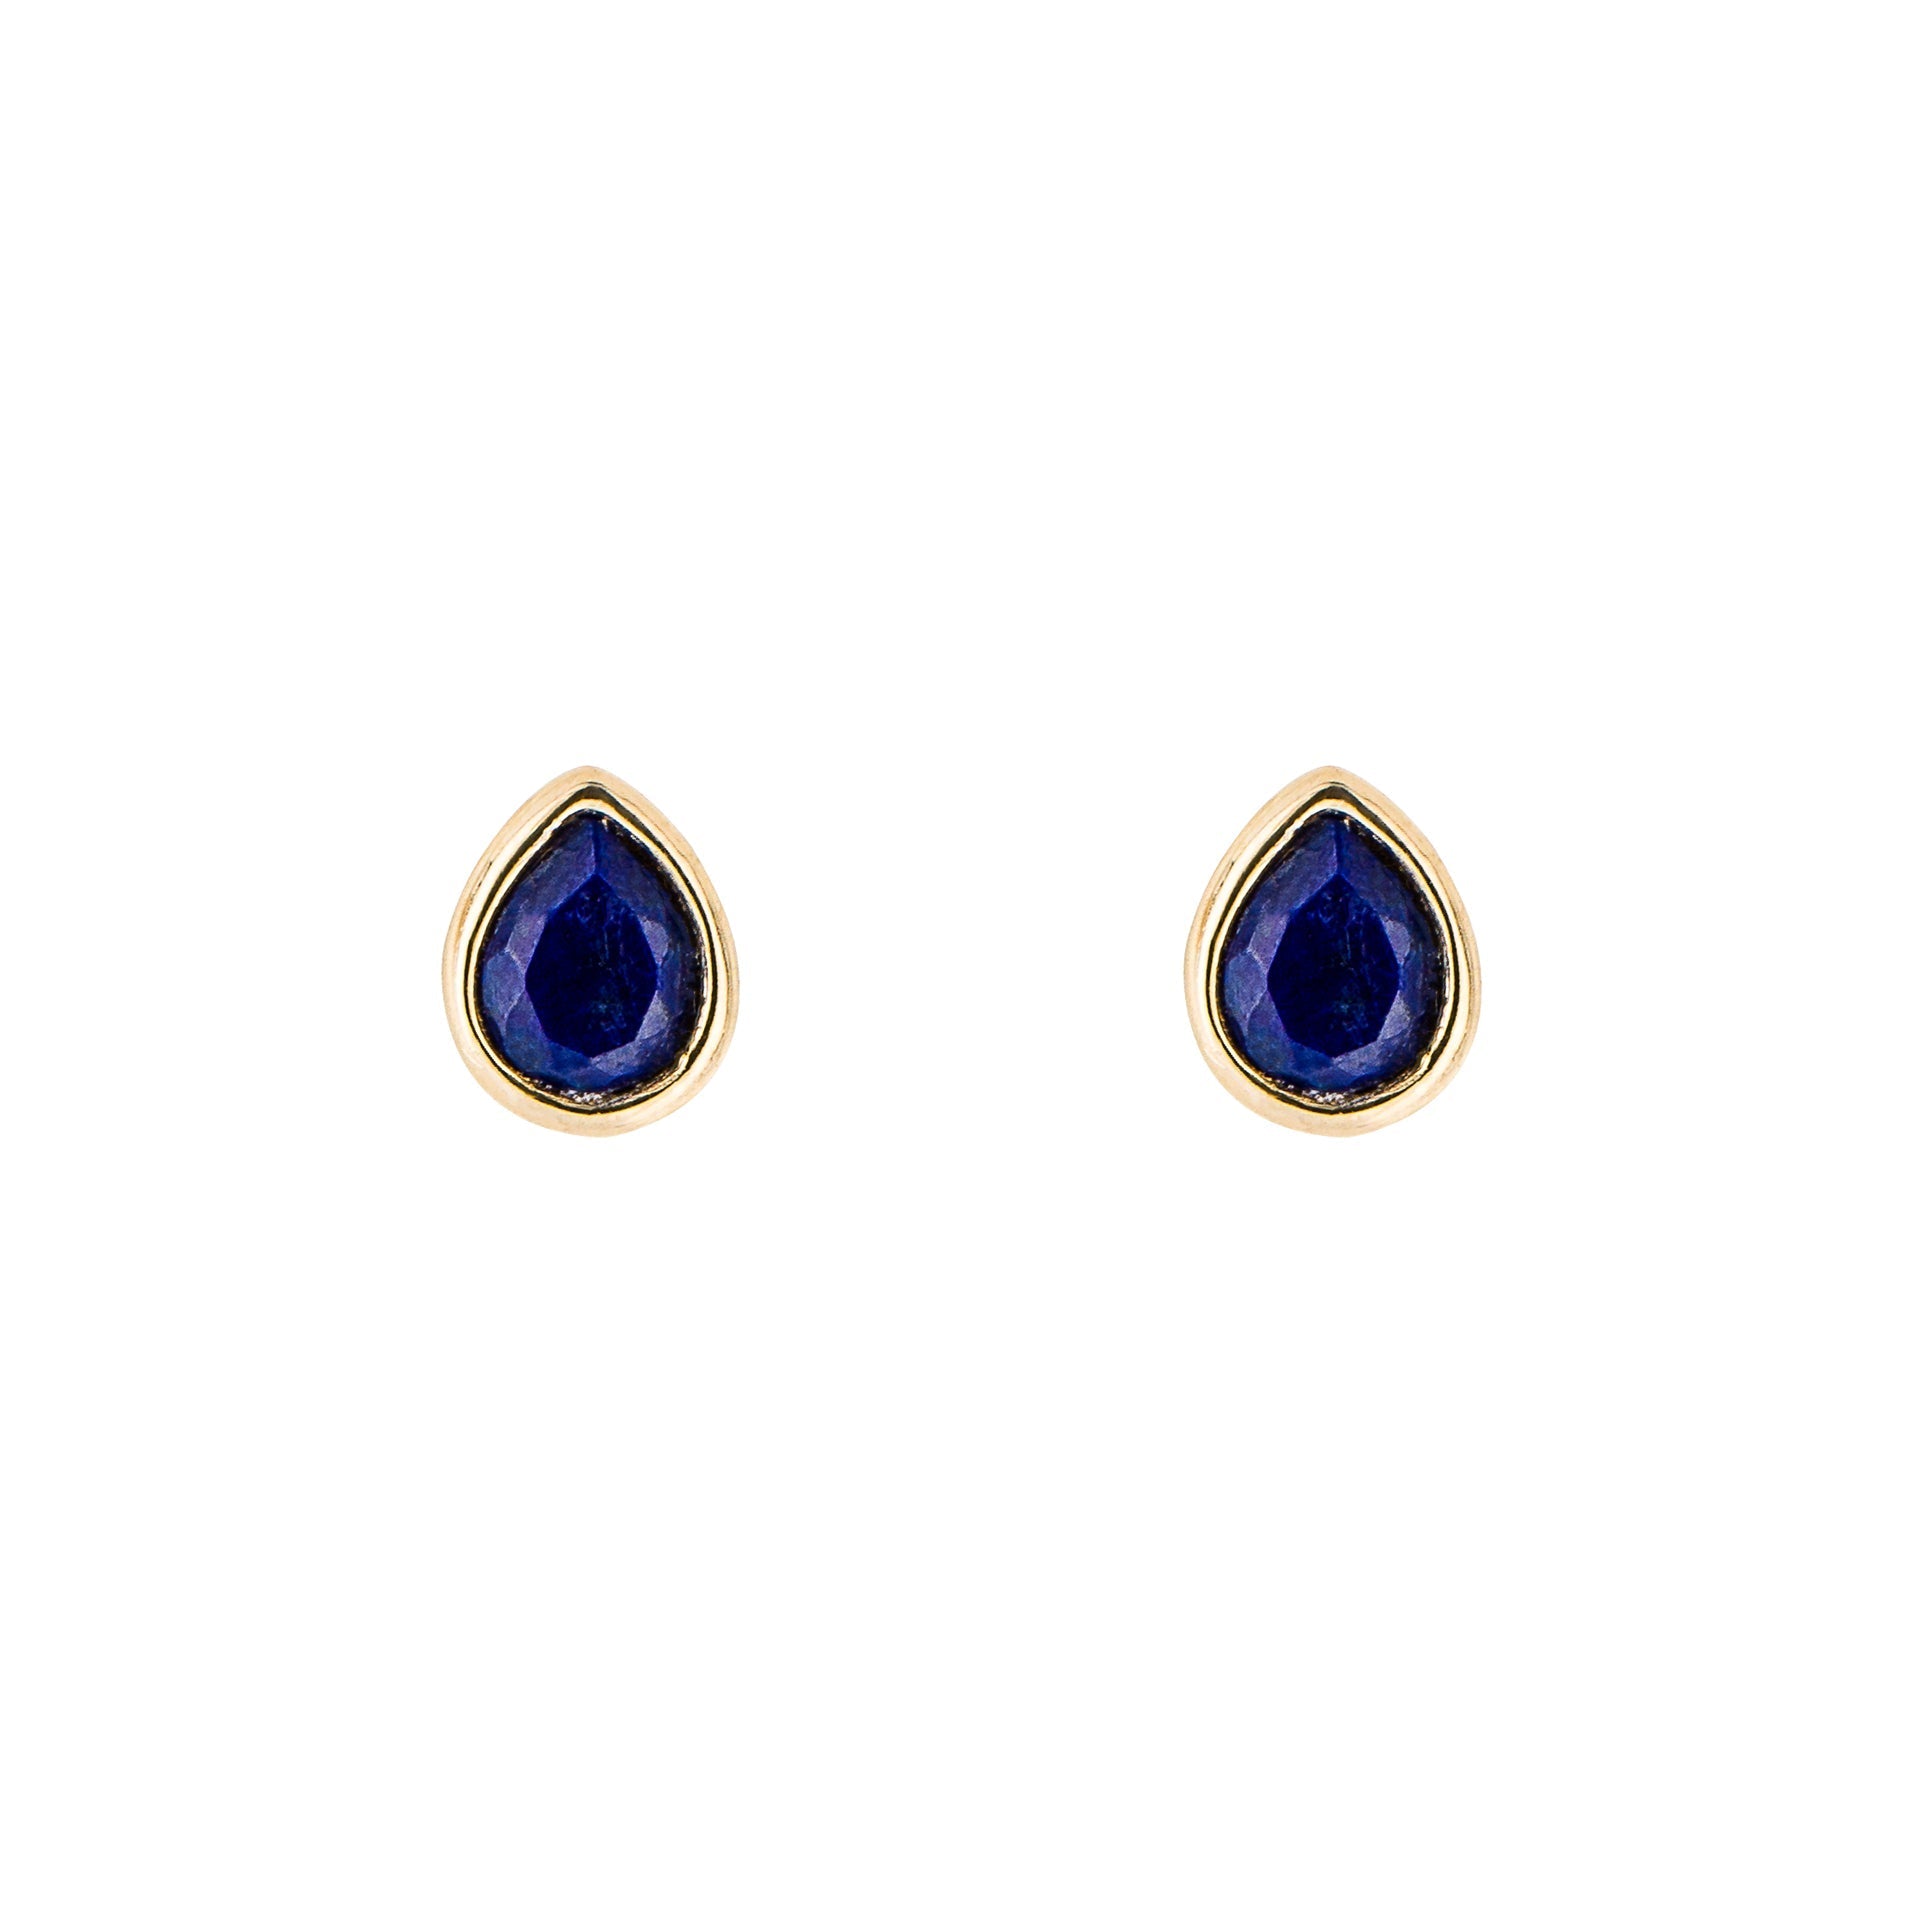 Lapis Lazuli pear shaped studs, gold plated on silver. - Collected